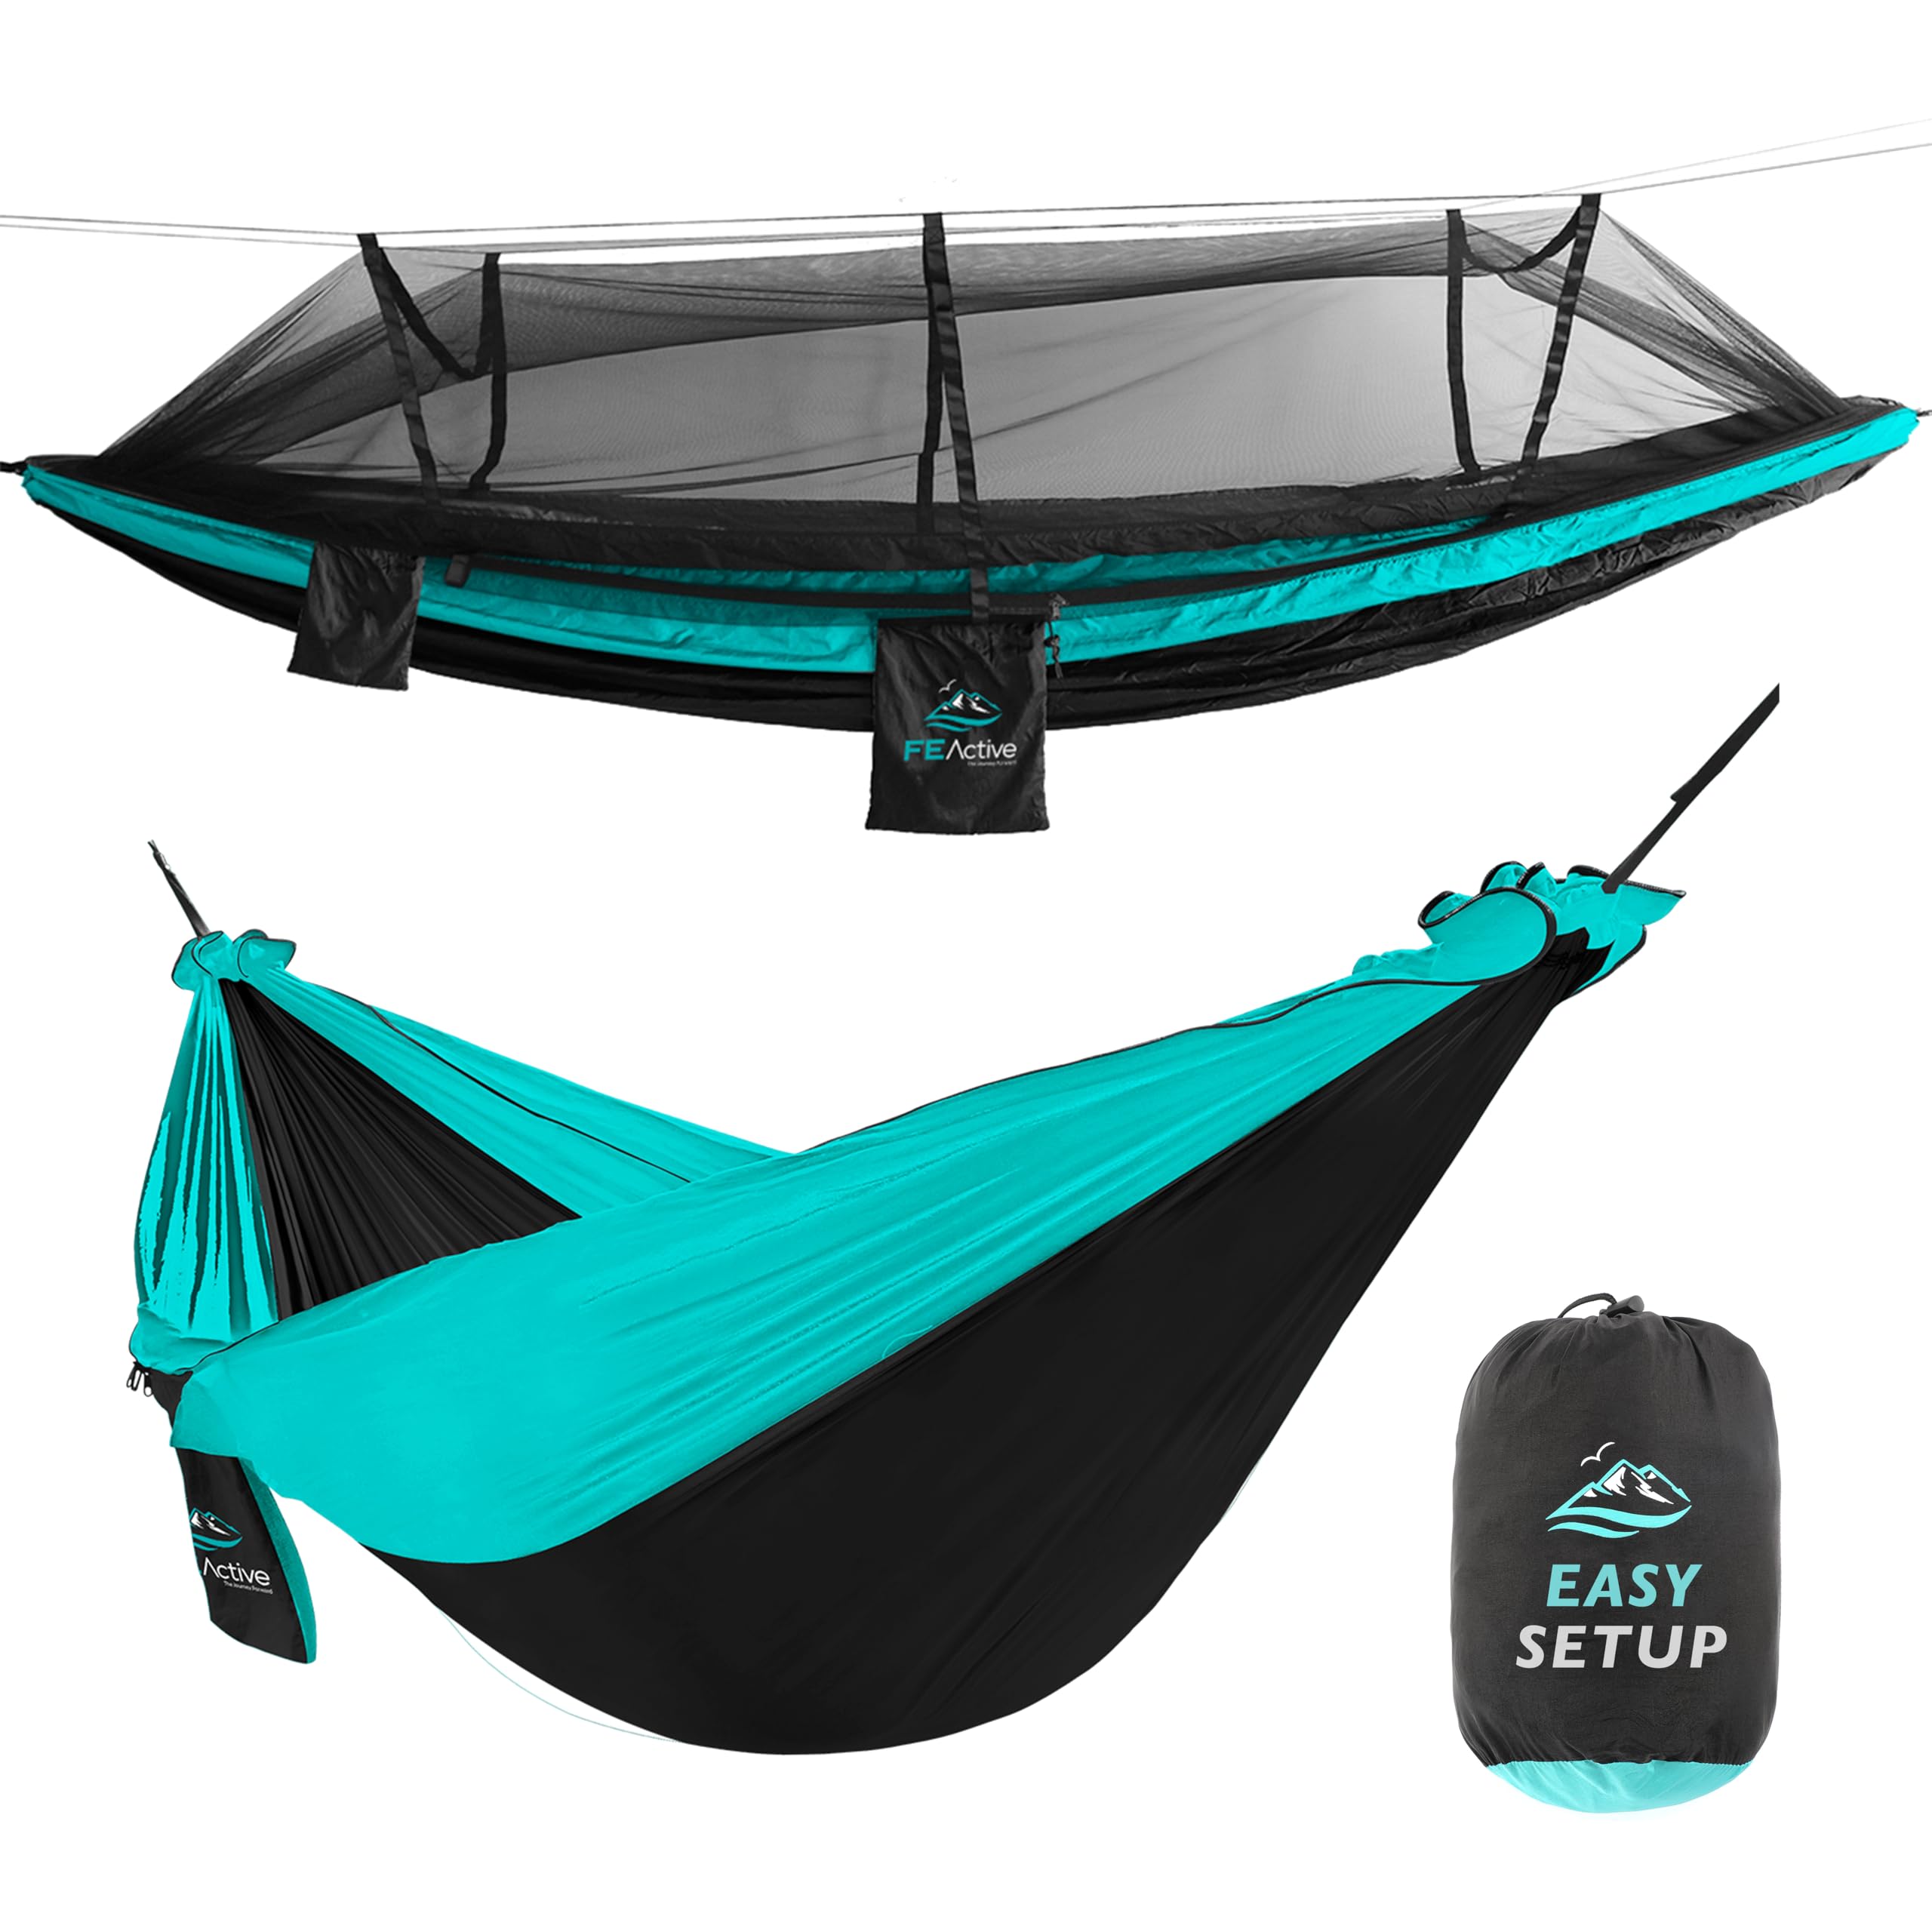 FE Active Outdoor camping Hammock - Double Hammock for Adults, Removable Mosquito Net, Lightweight, Portable Hammock Tent for ca